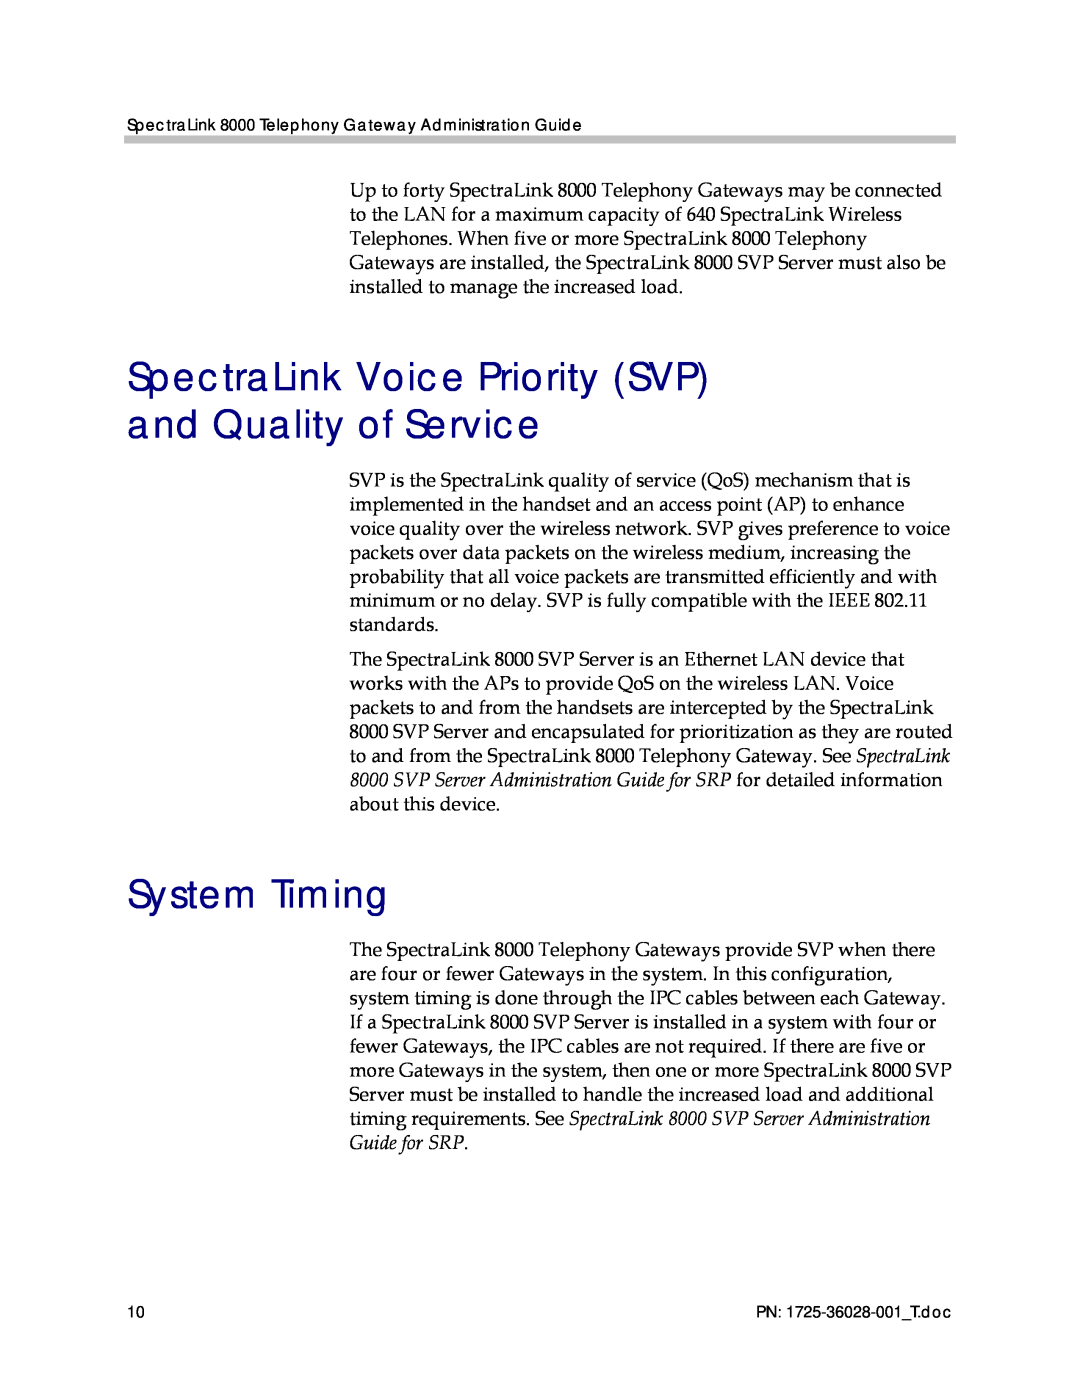 Polycom 1725-36028-001 manual SpectraLink Voice Priority SVP and Quality of Service, System Timing 